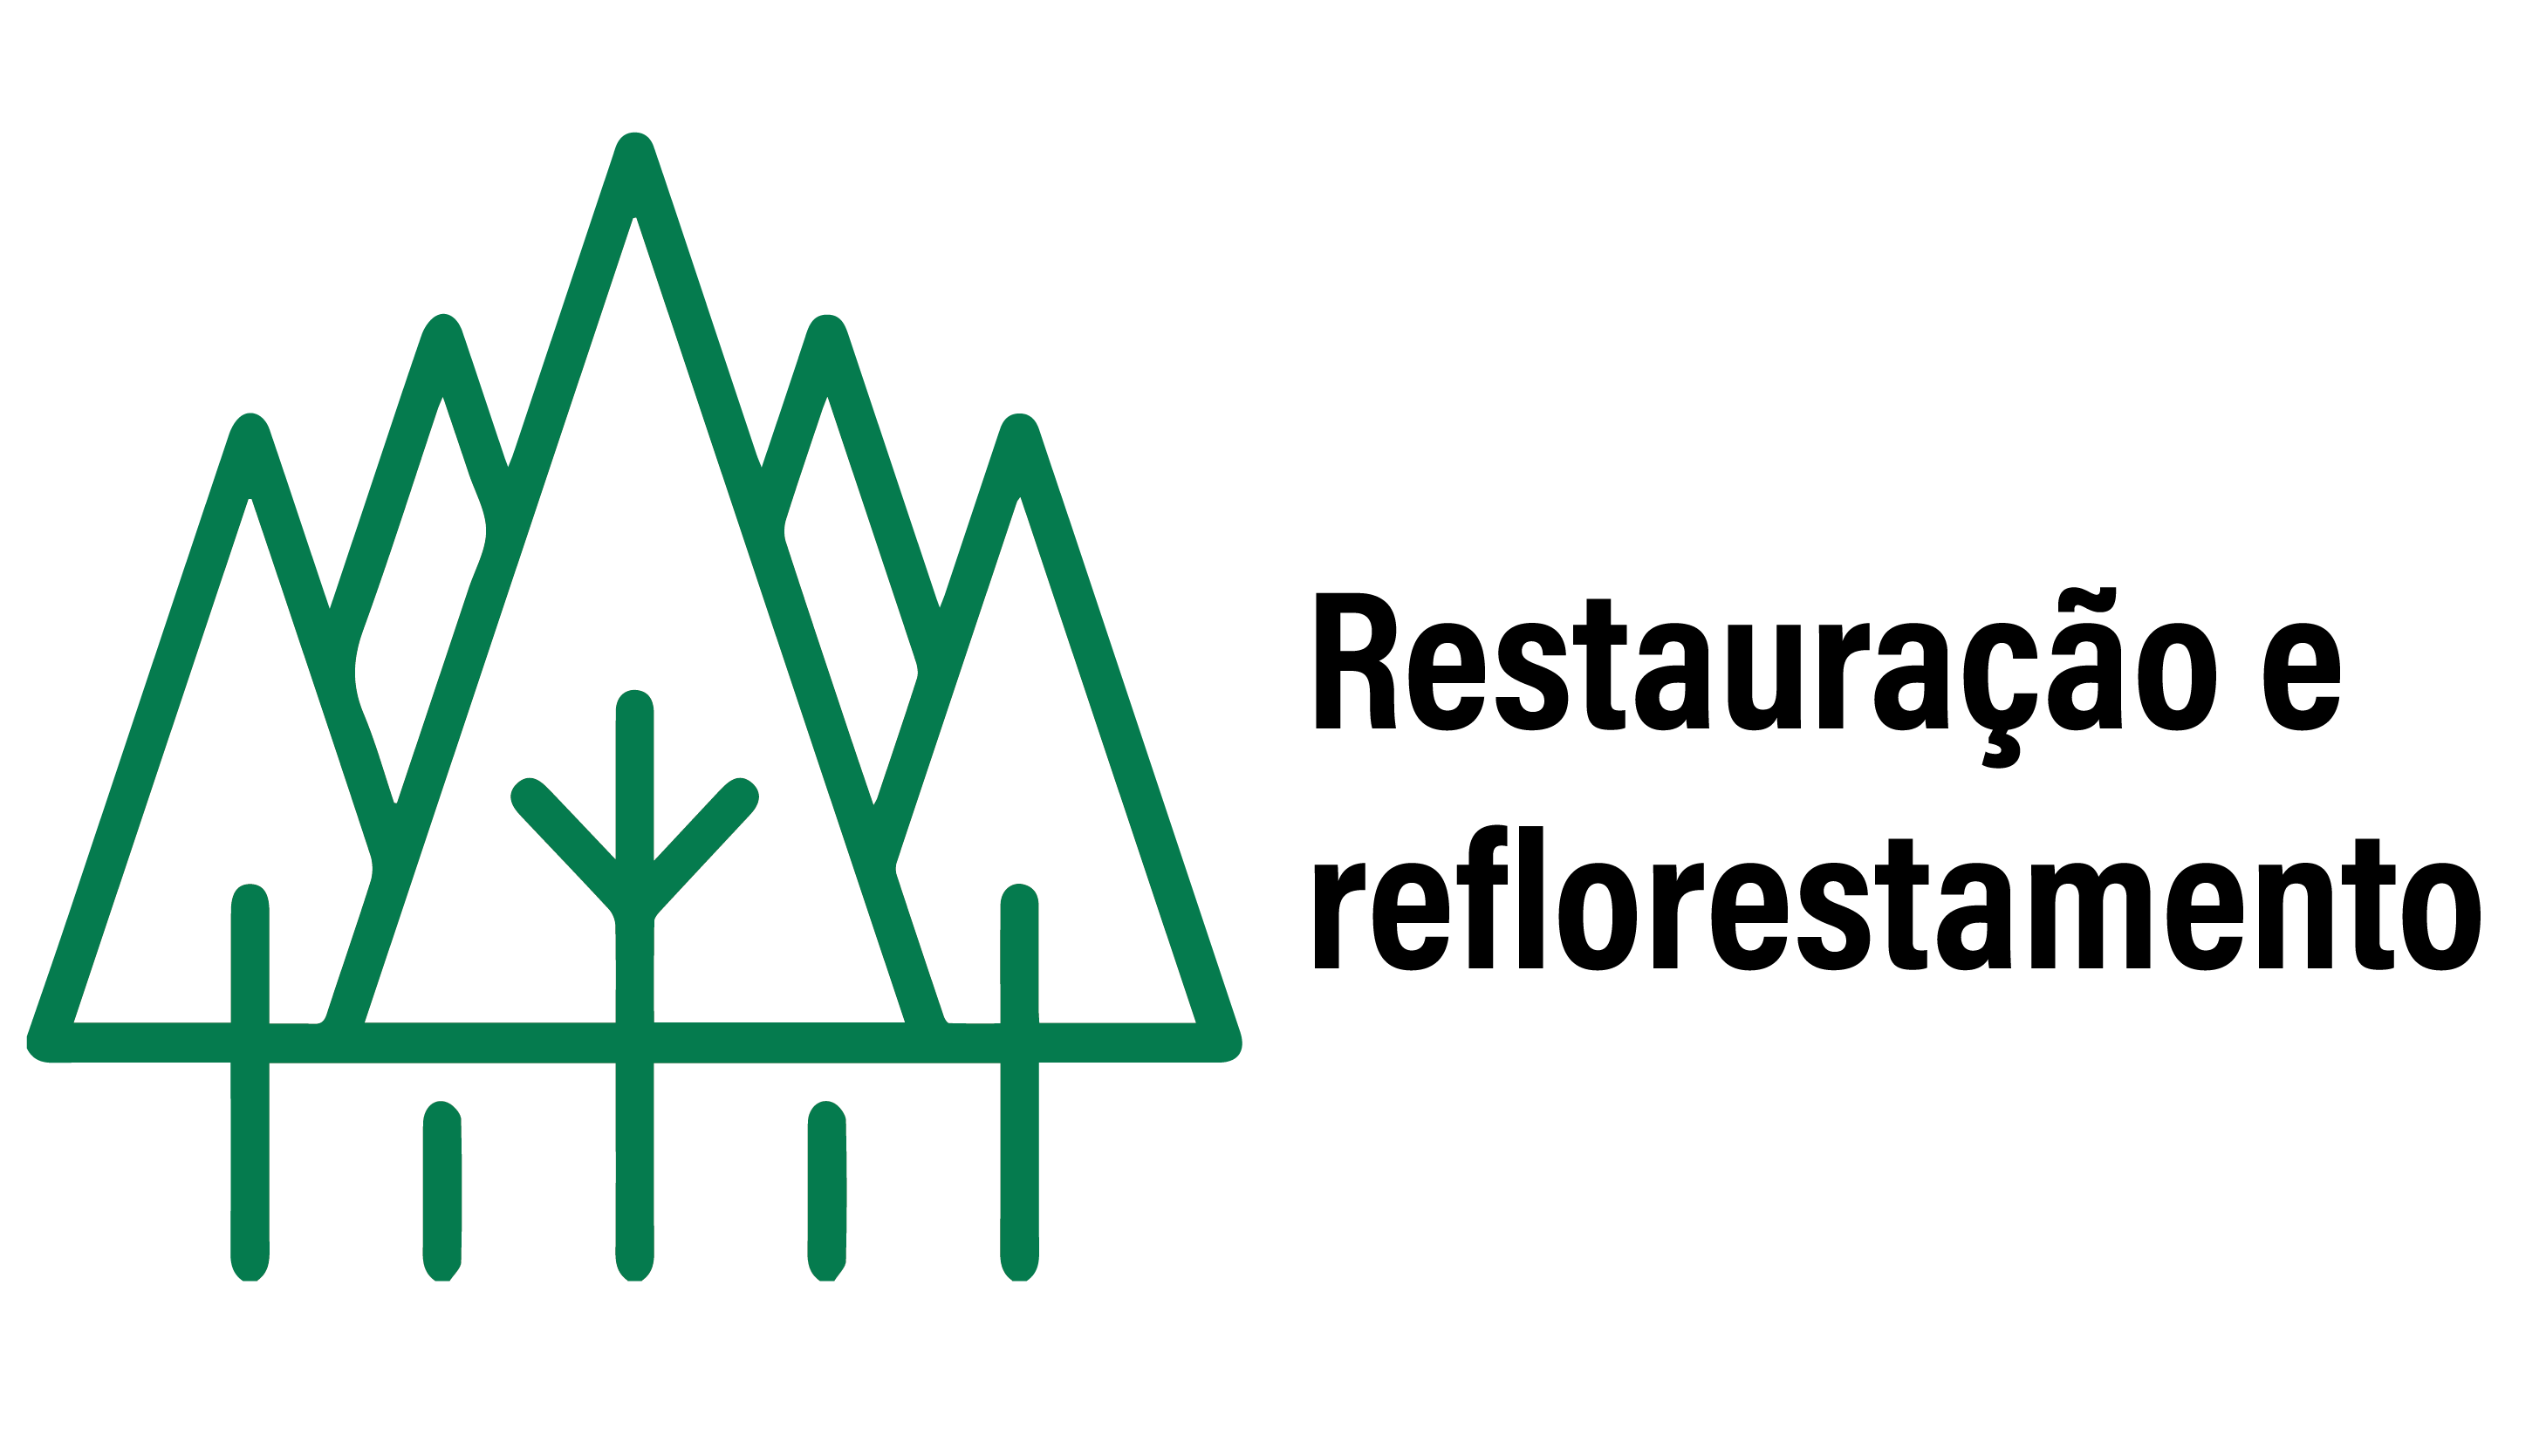 group of trees to represent afforestation and reforestation